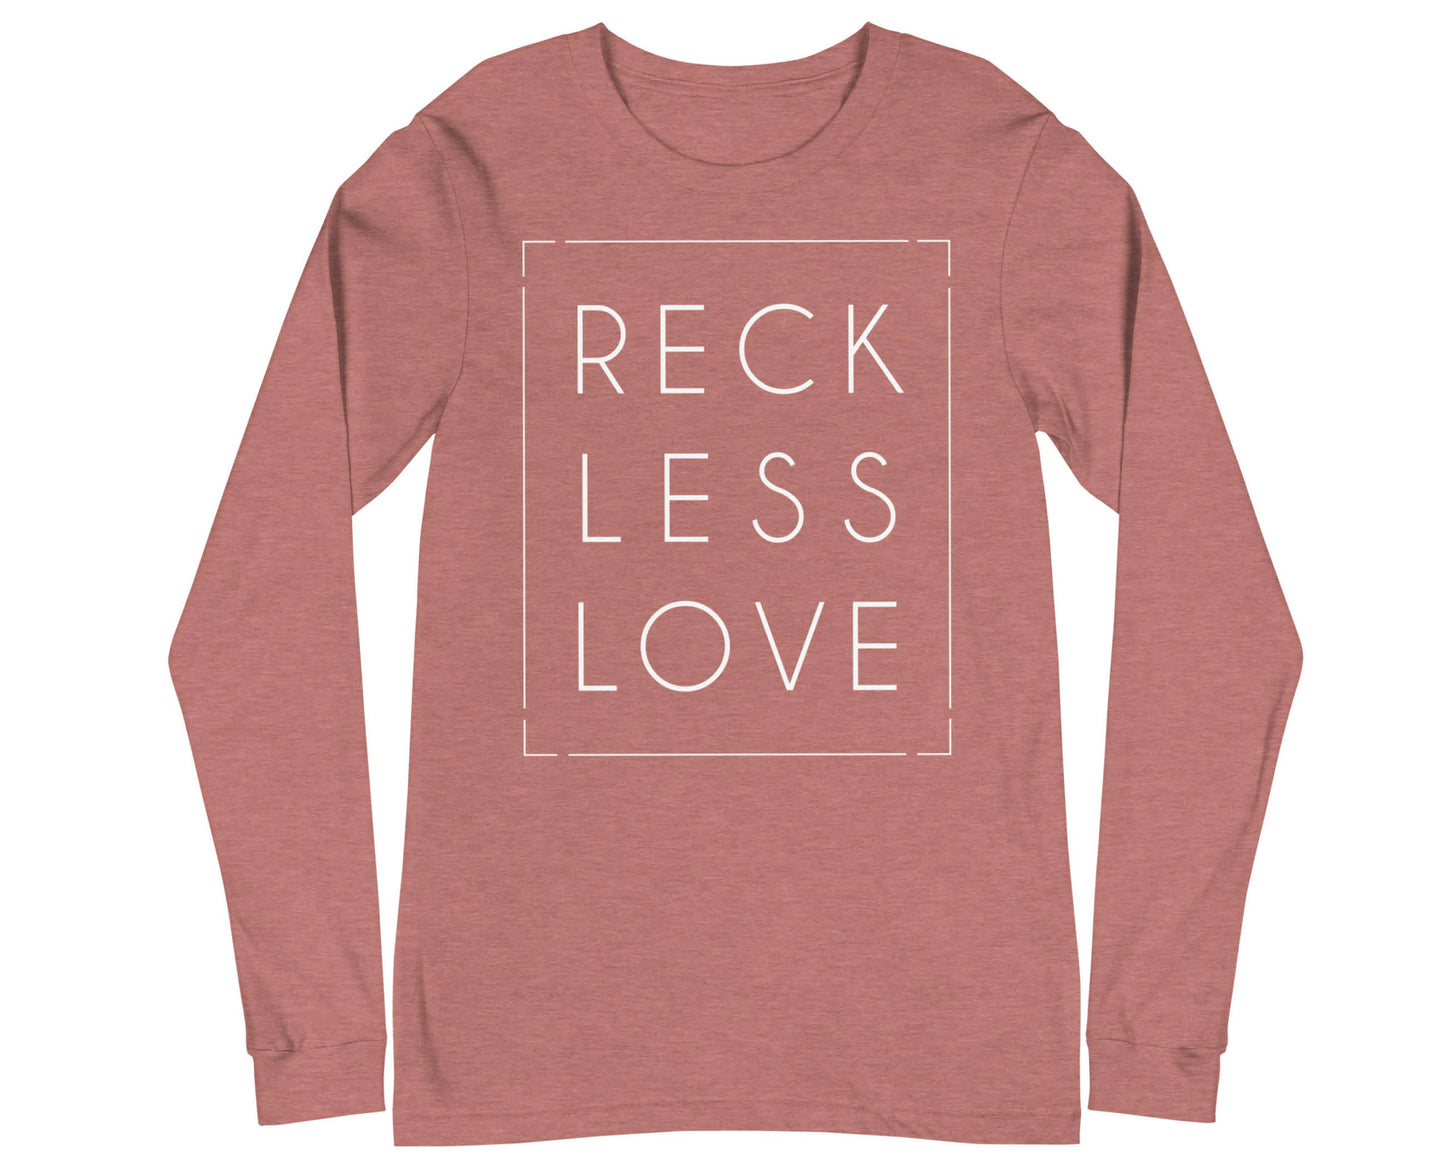 Rectangle Reckless Love Christian aesthetic worship design printed in white on cozy mauve dusty rose unisex long sleeve tee shirt for men and women